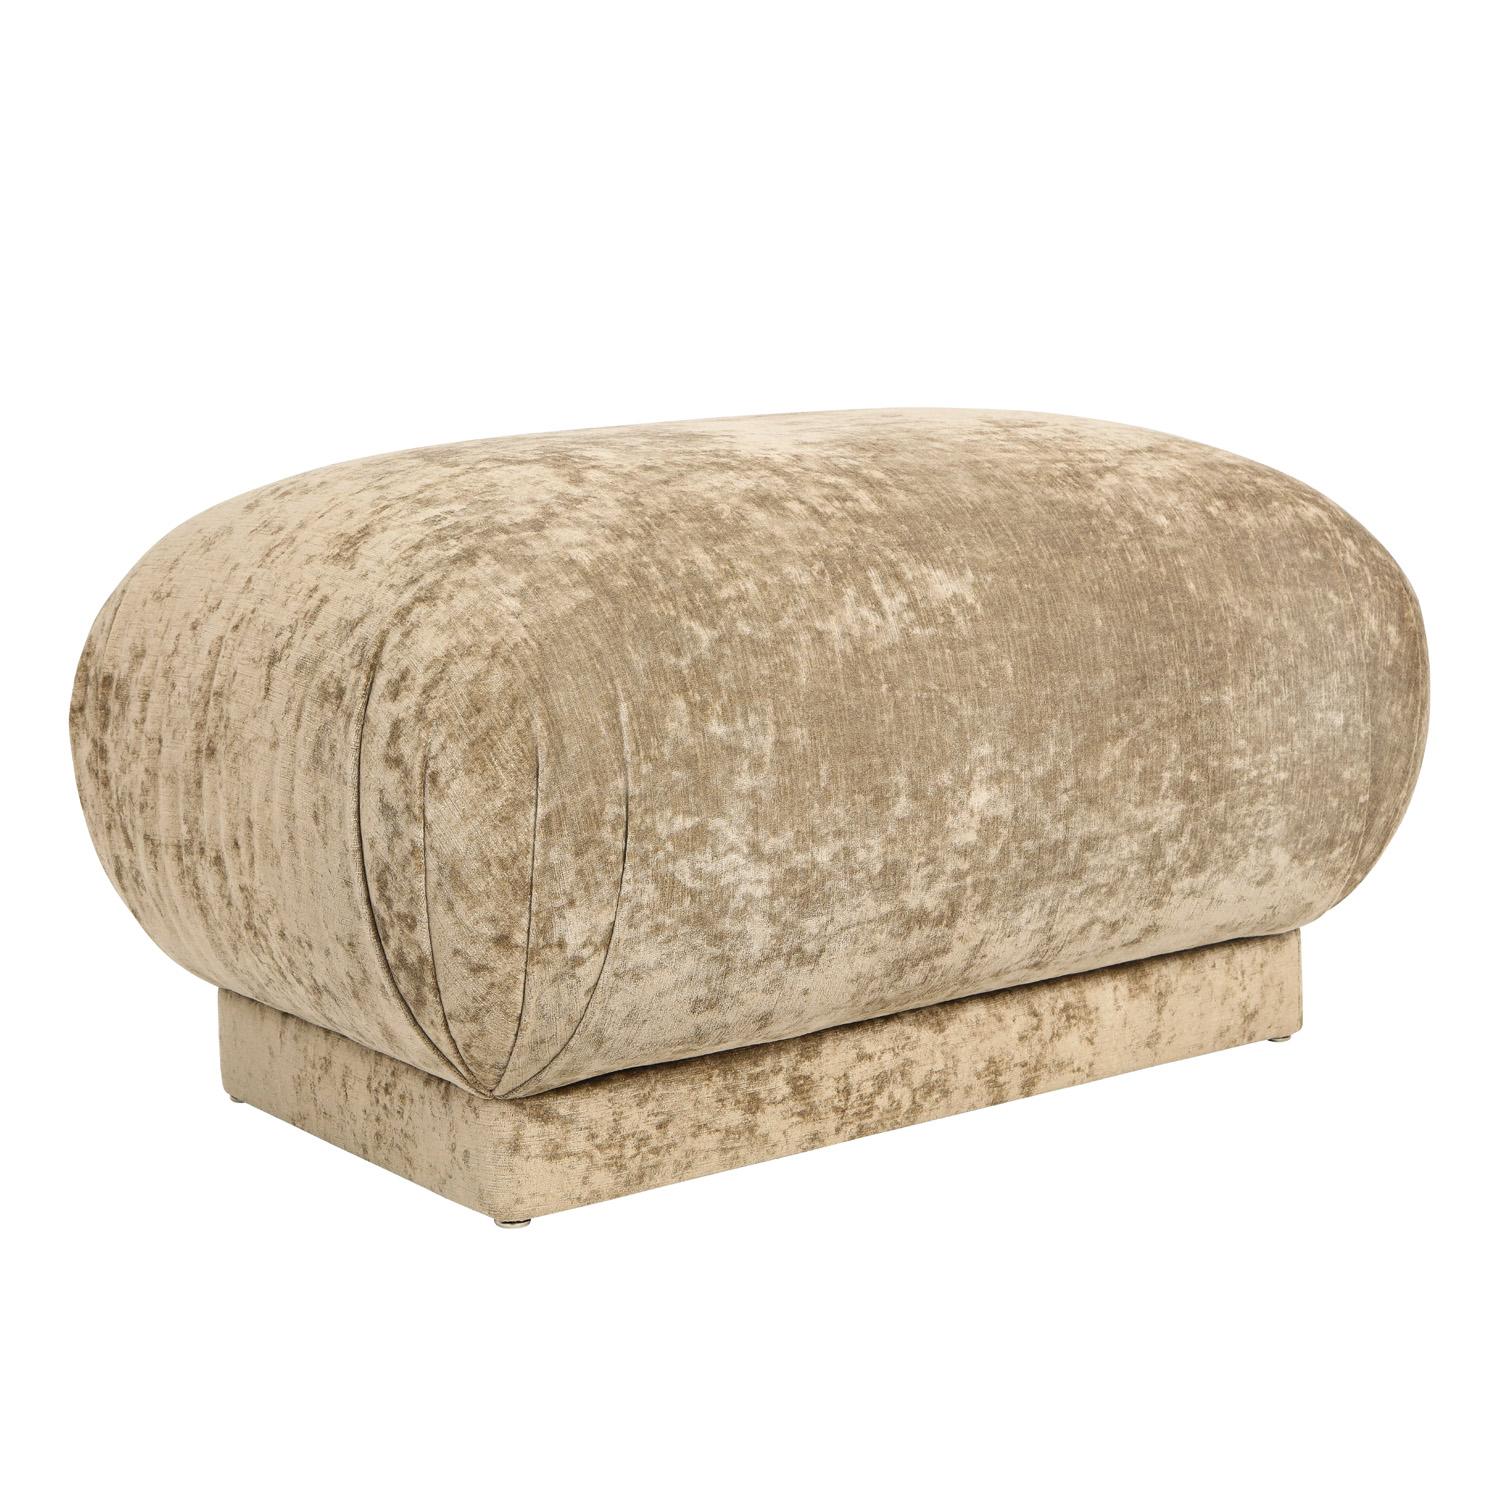 Fully upholstered rectangular ottoman in beige chenille, American 1970's. This handsome ottoman is in the style of a Karl Springer Souffle ottoman.